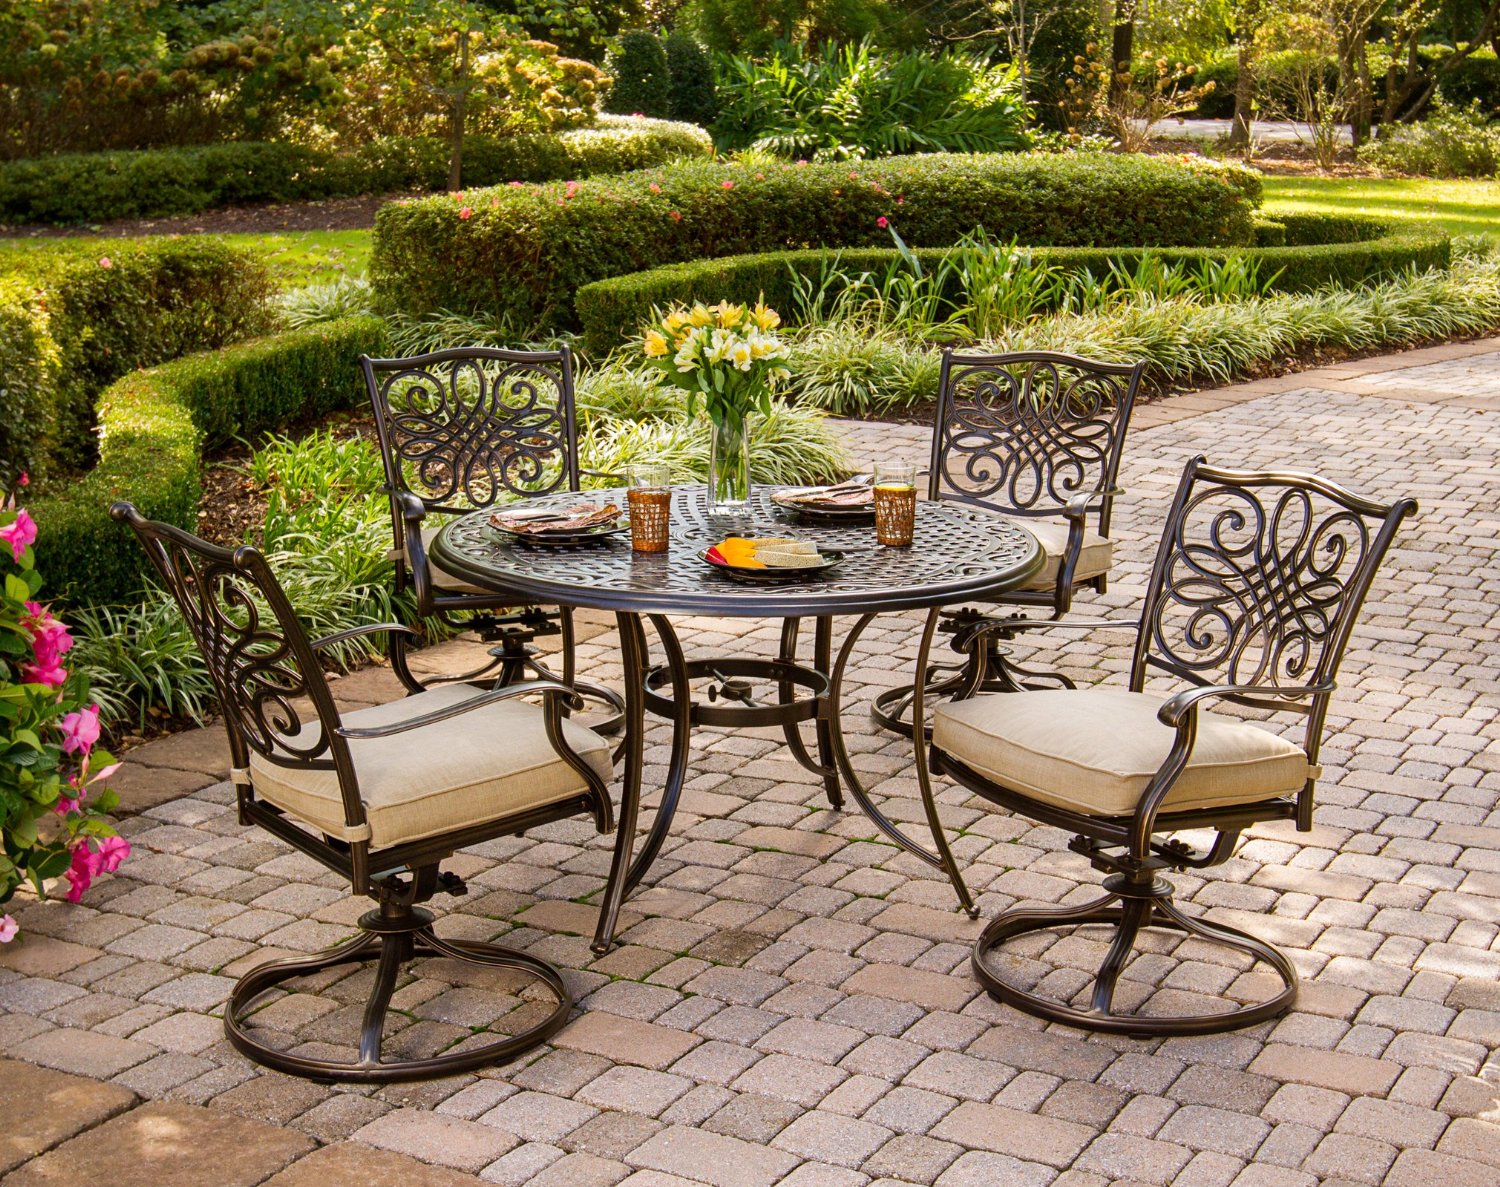 Patio With Room Fascinating Patio With Round Dining Room Tables Completed By Vase Flowers Decoration And Dining Fixtures Also Furnished With Pedestal Chairs Dining Room Perfect Round Dining Room Tables